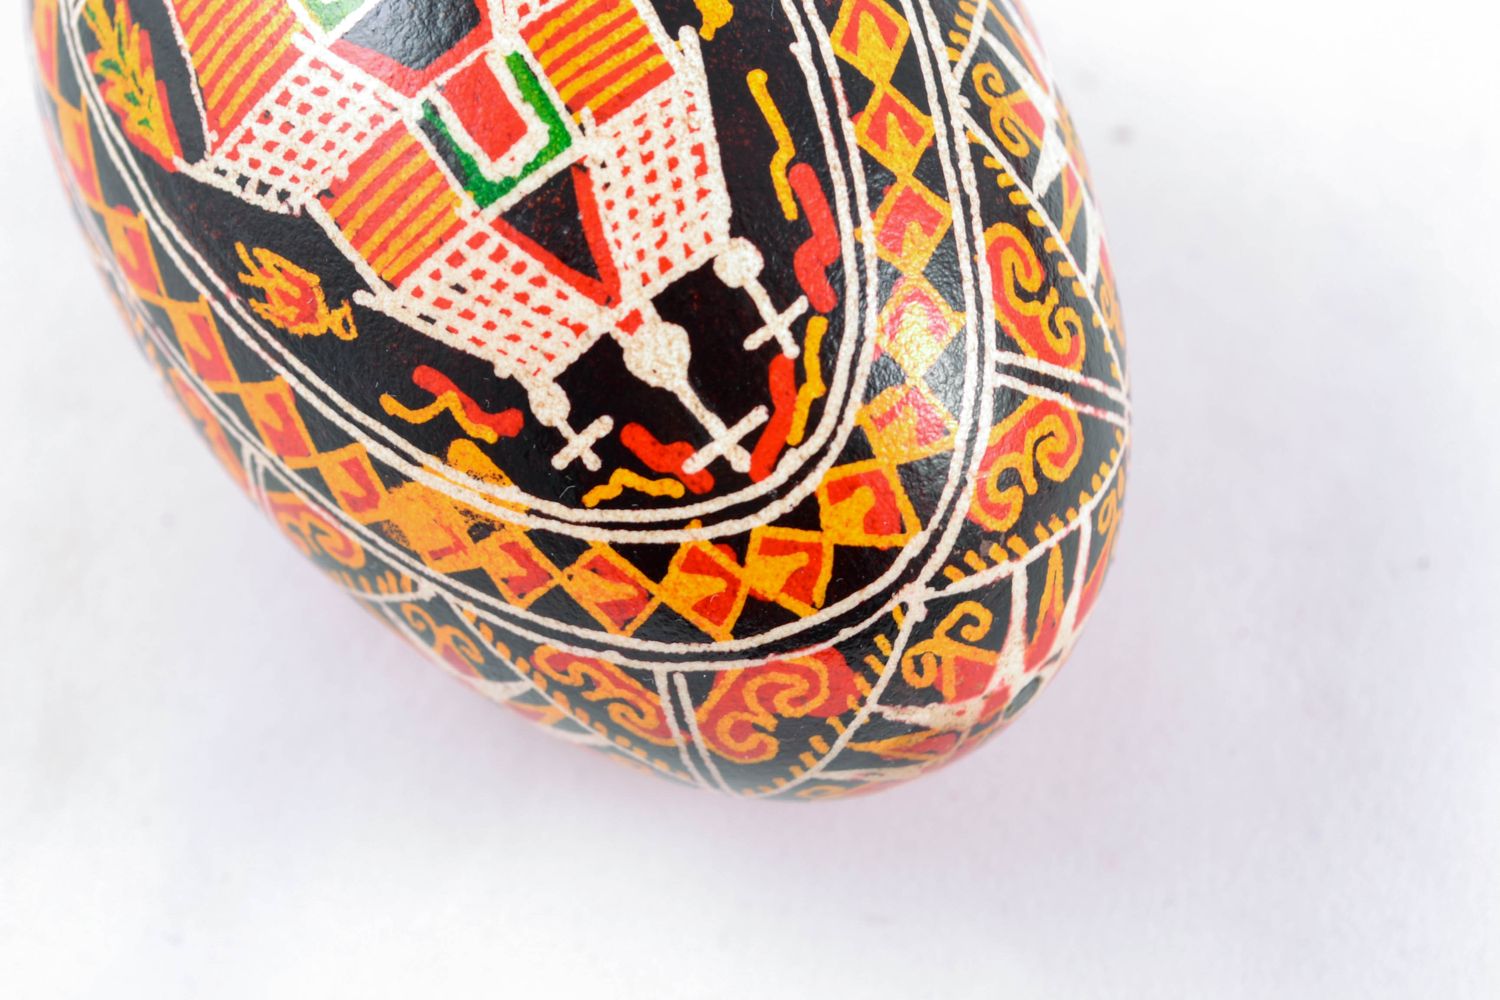 Handmade painted goose egg with sacral symbols photo 5